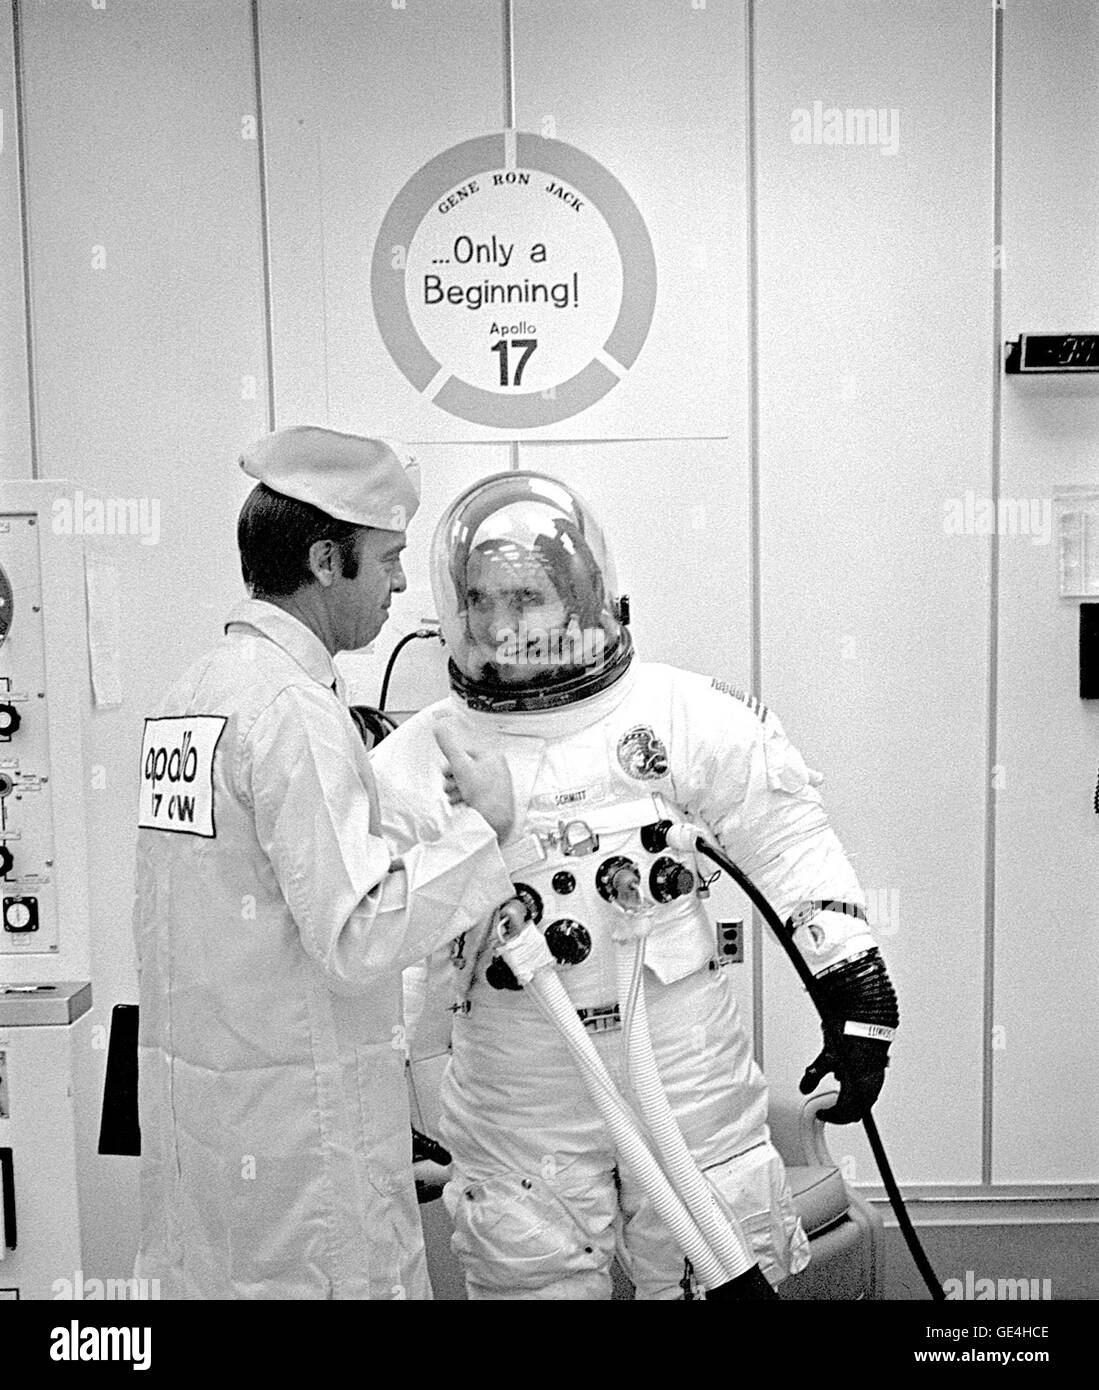 (December 6, 1972) Apollo 17 Lunar Module Pilot Harrison H. Schmitt shares a moment of relaxation with astronaut Alan Shepard during prelaunch suiting operations. Schmitt will explore the Moon's Taurus-Littrow region with Mission Commander Eugene A. Cernan during NASA's sixth and last manned lunar landing mission. The third crewman, Ronald E. Evans, will pilot the command module alone in lunar orbit during his crewmates' surface exploration.  Image # : 72P-0547 Stock Photo